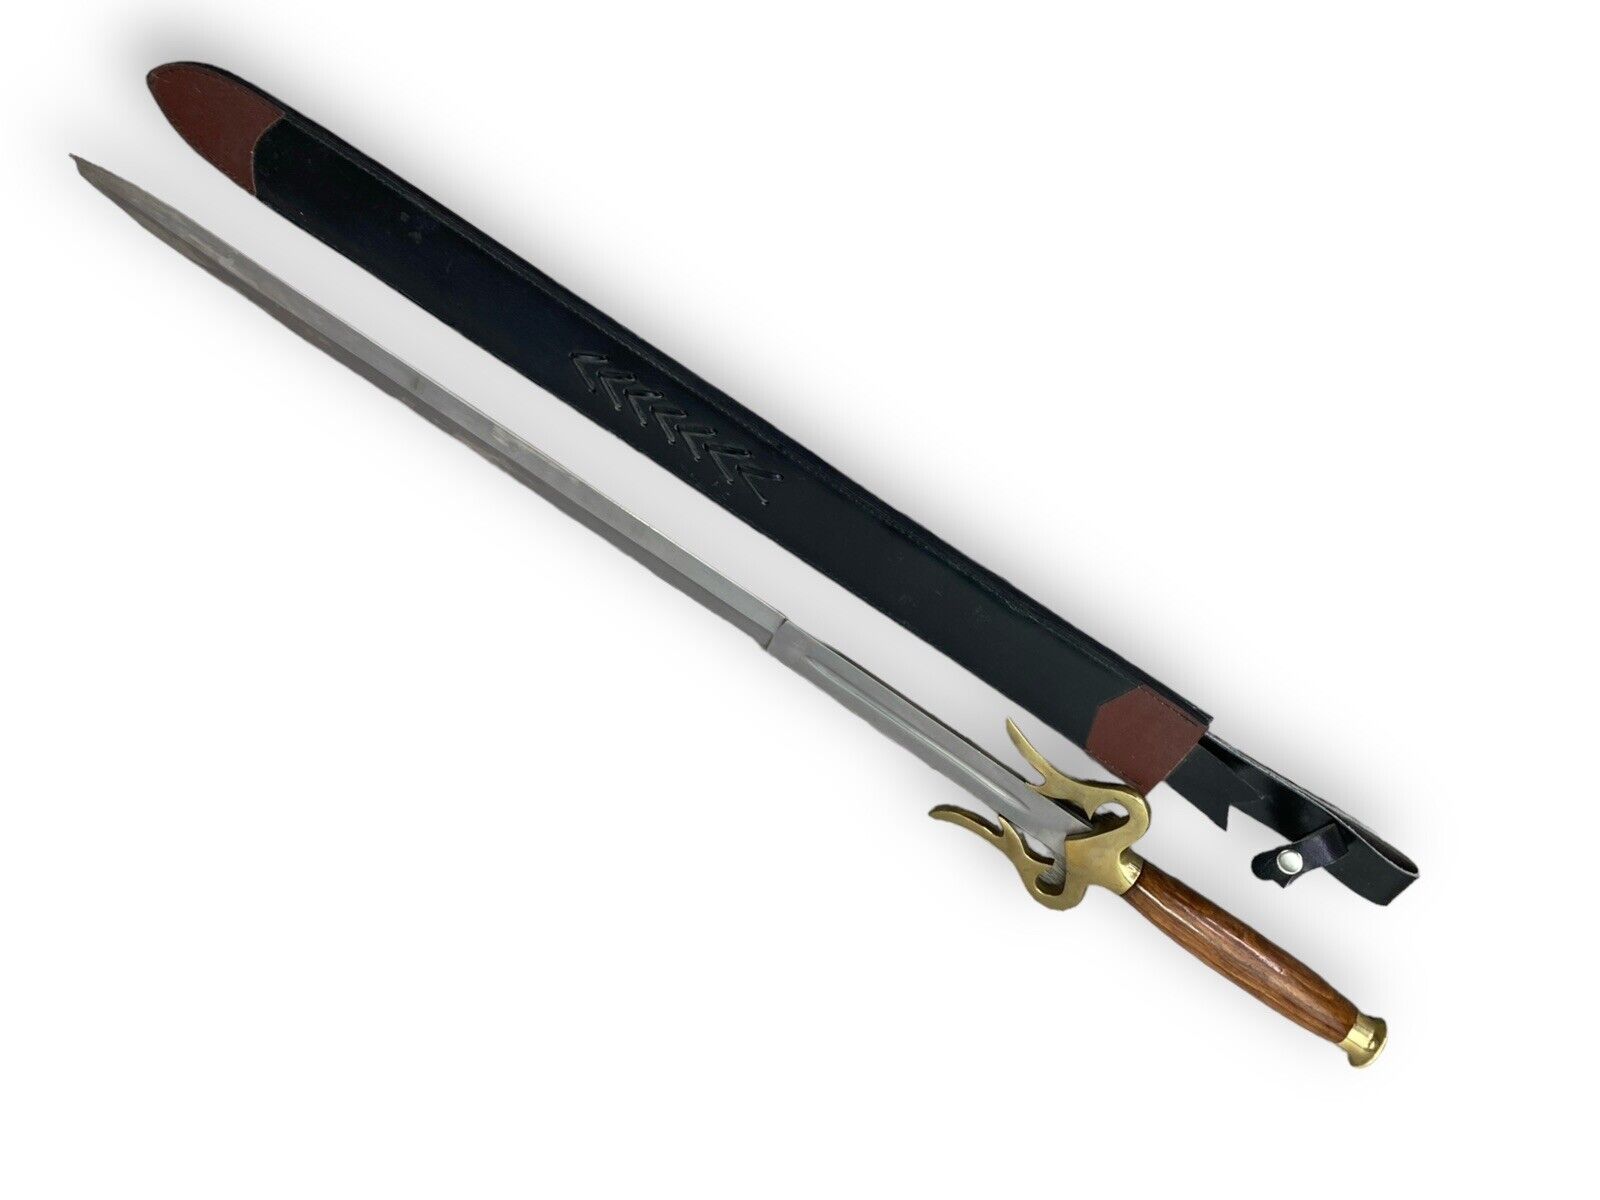 Two Handed Pakistani Made Sword 32’ By 1.5 Inches Wooden Handle And Brass